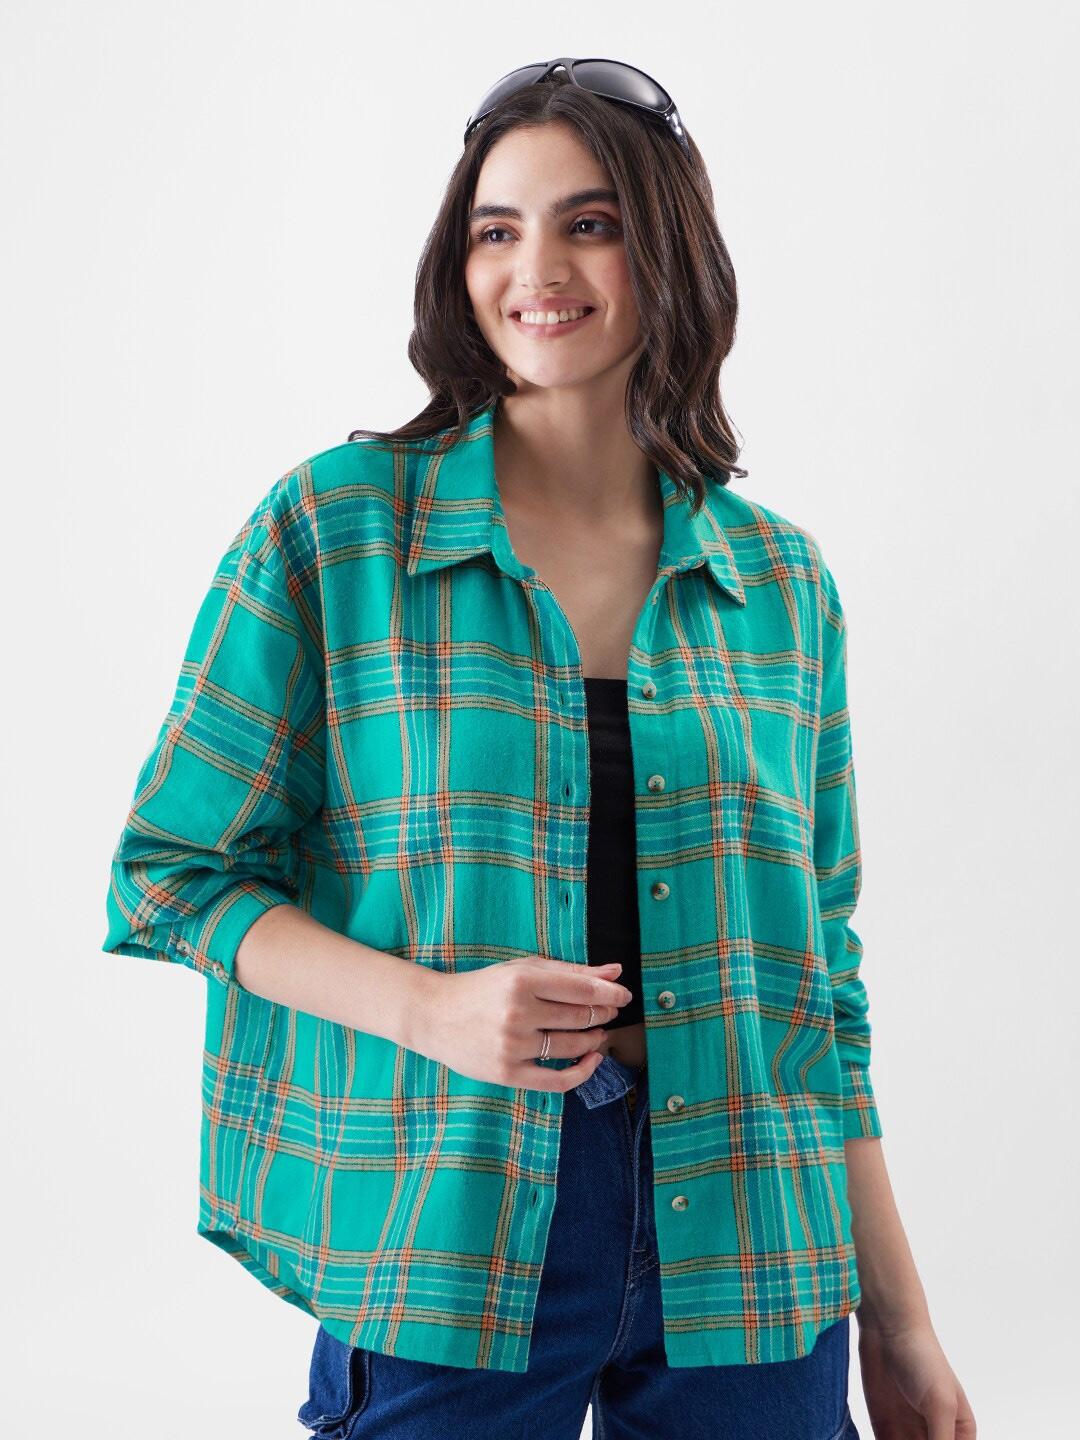 The Souled Store Relaxed Boxy Tartan Checked Cotton Casual Shirt